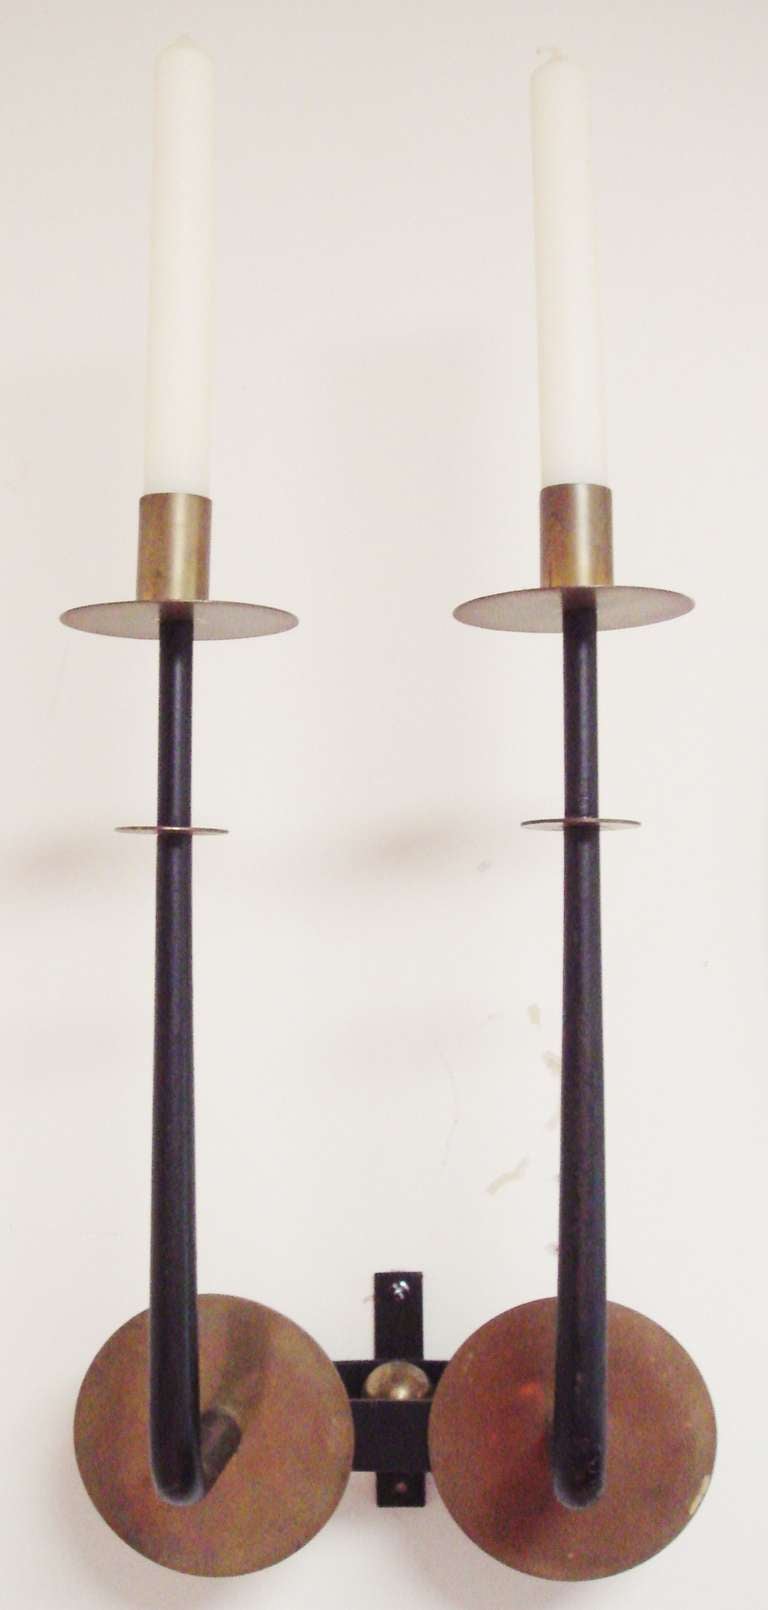 This very elegant pair of American Mid-Century Modern wall mounted twin candle sconces are in the style of Tommi Parzinger. They are extremely well constructed with twin shafts in hand-hammered forged iron that are finished in matte black. Each